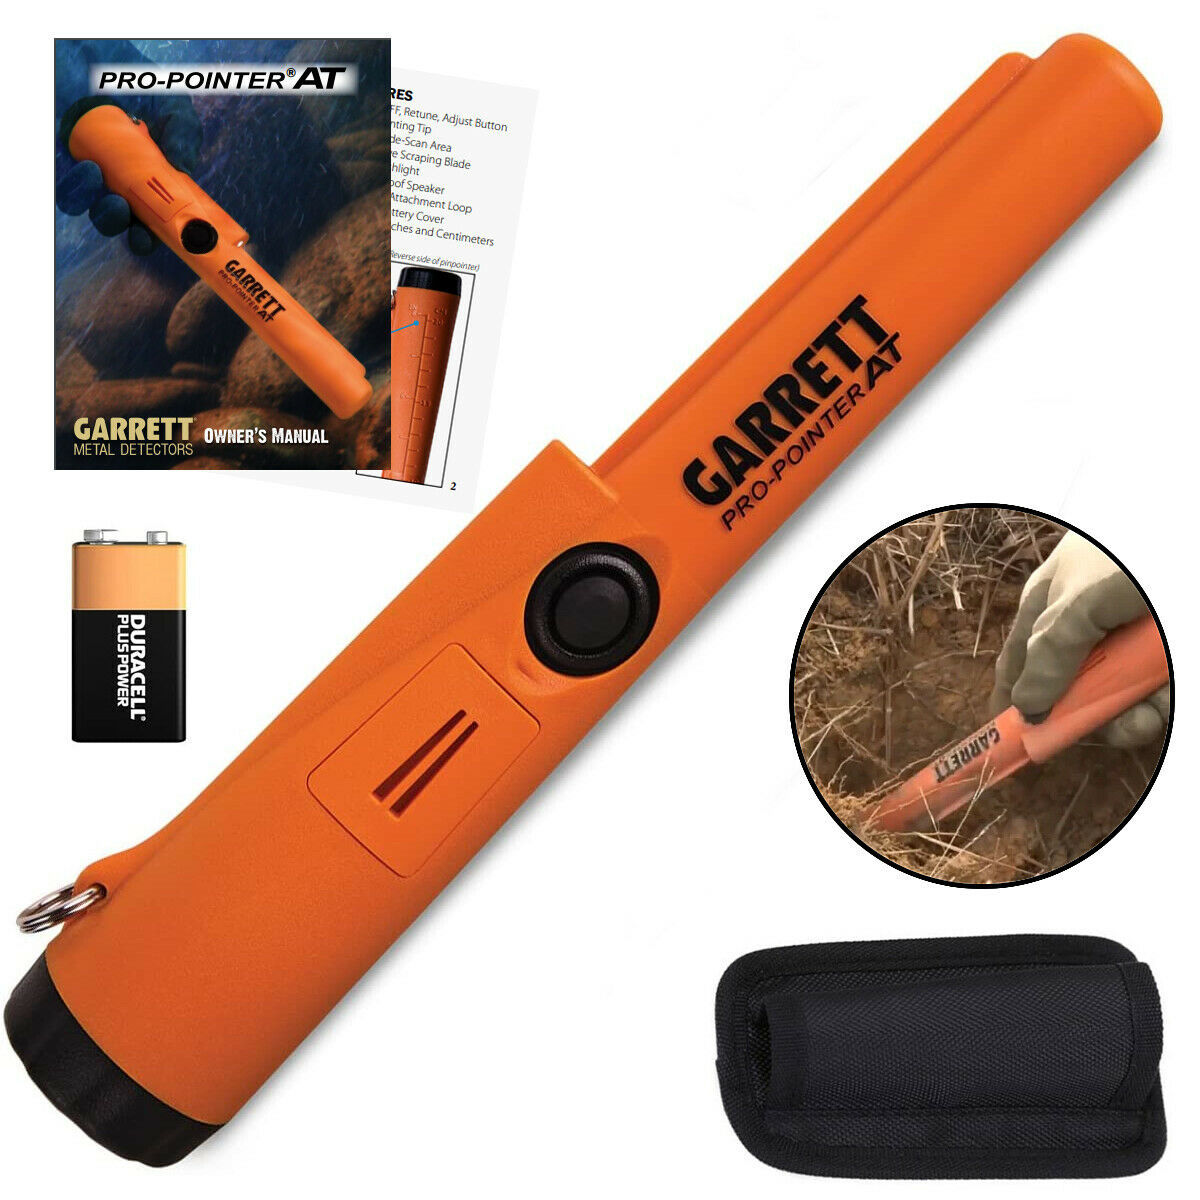 Authentic Garrett Propointer AT Waterproof Pinpointer with Holster and Battery